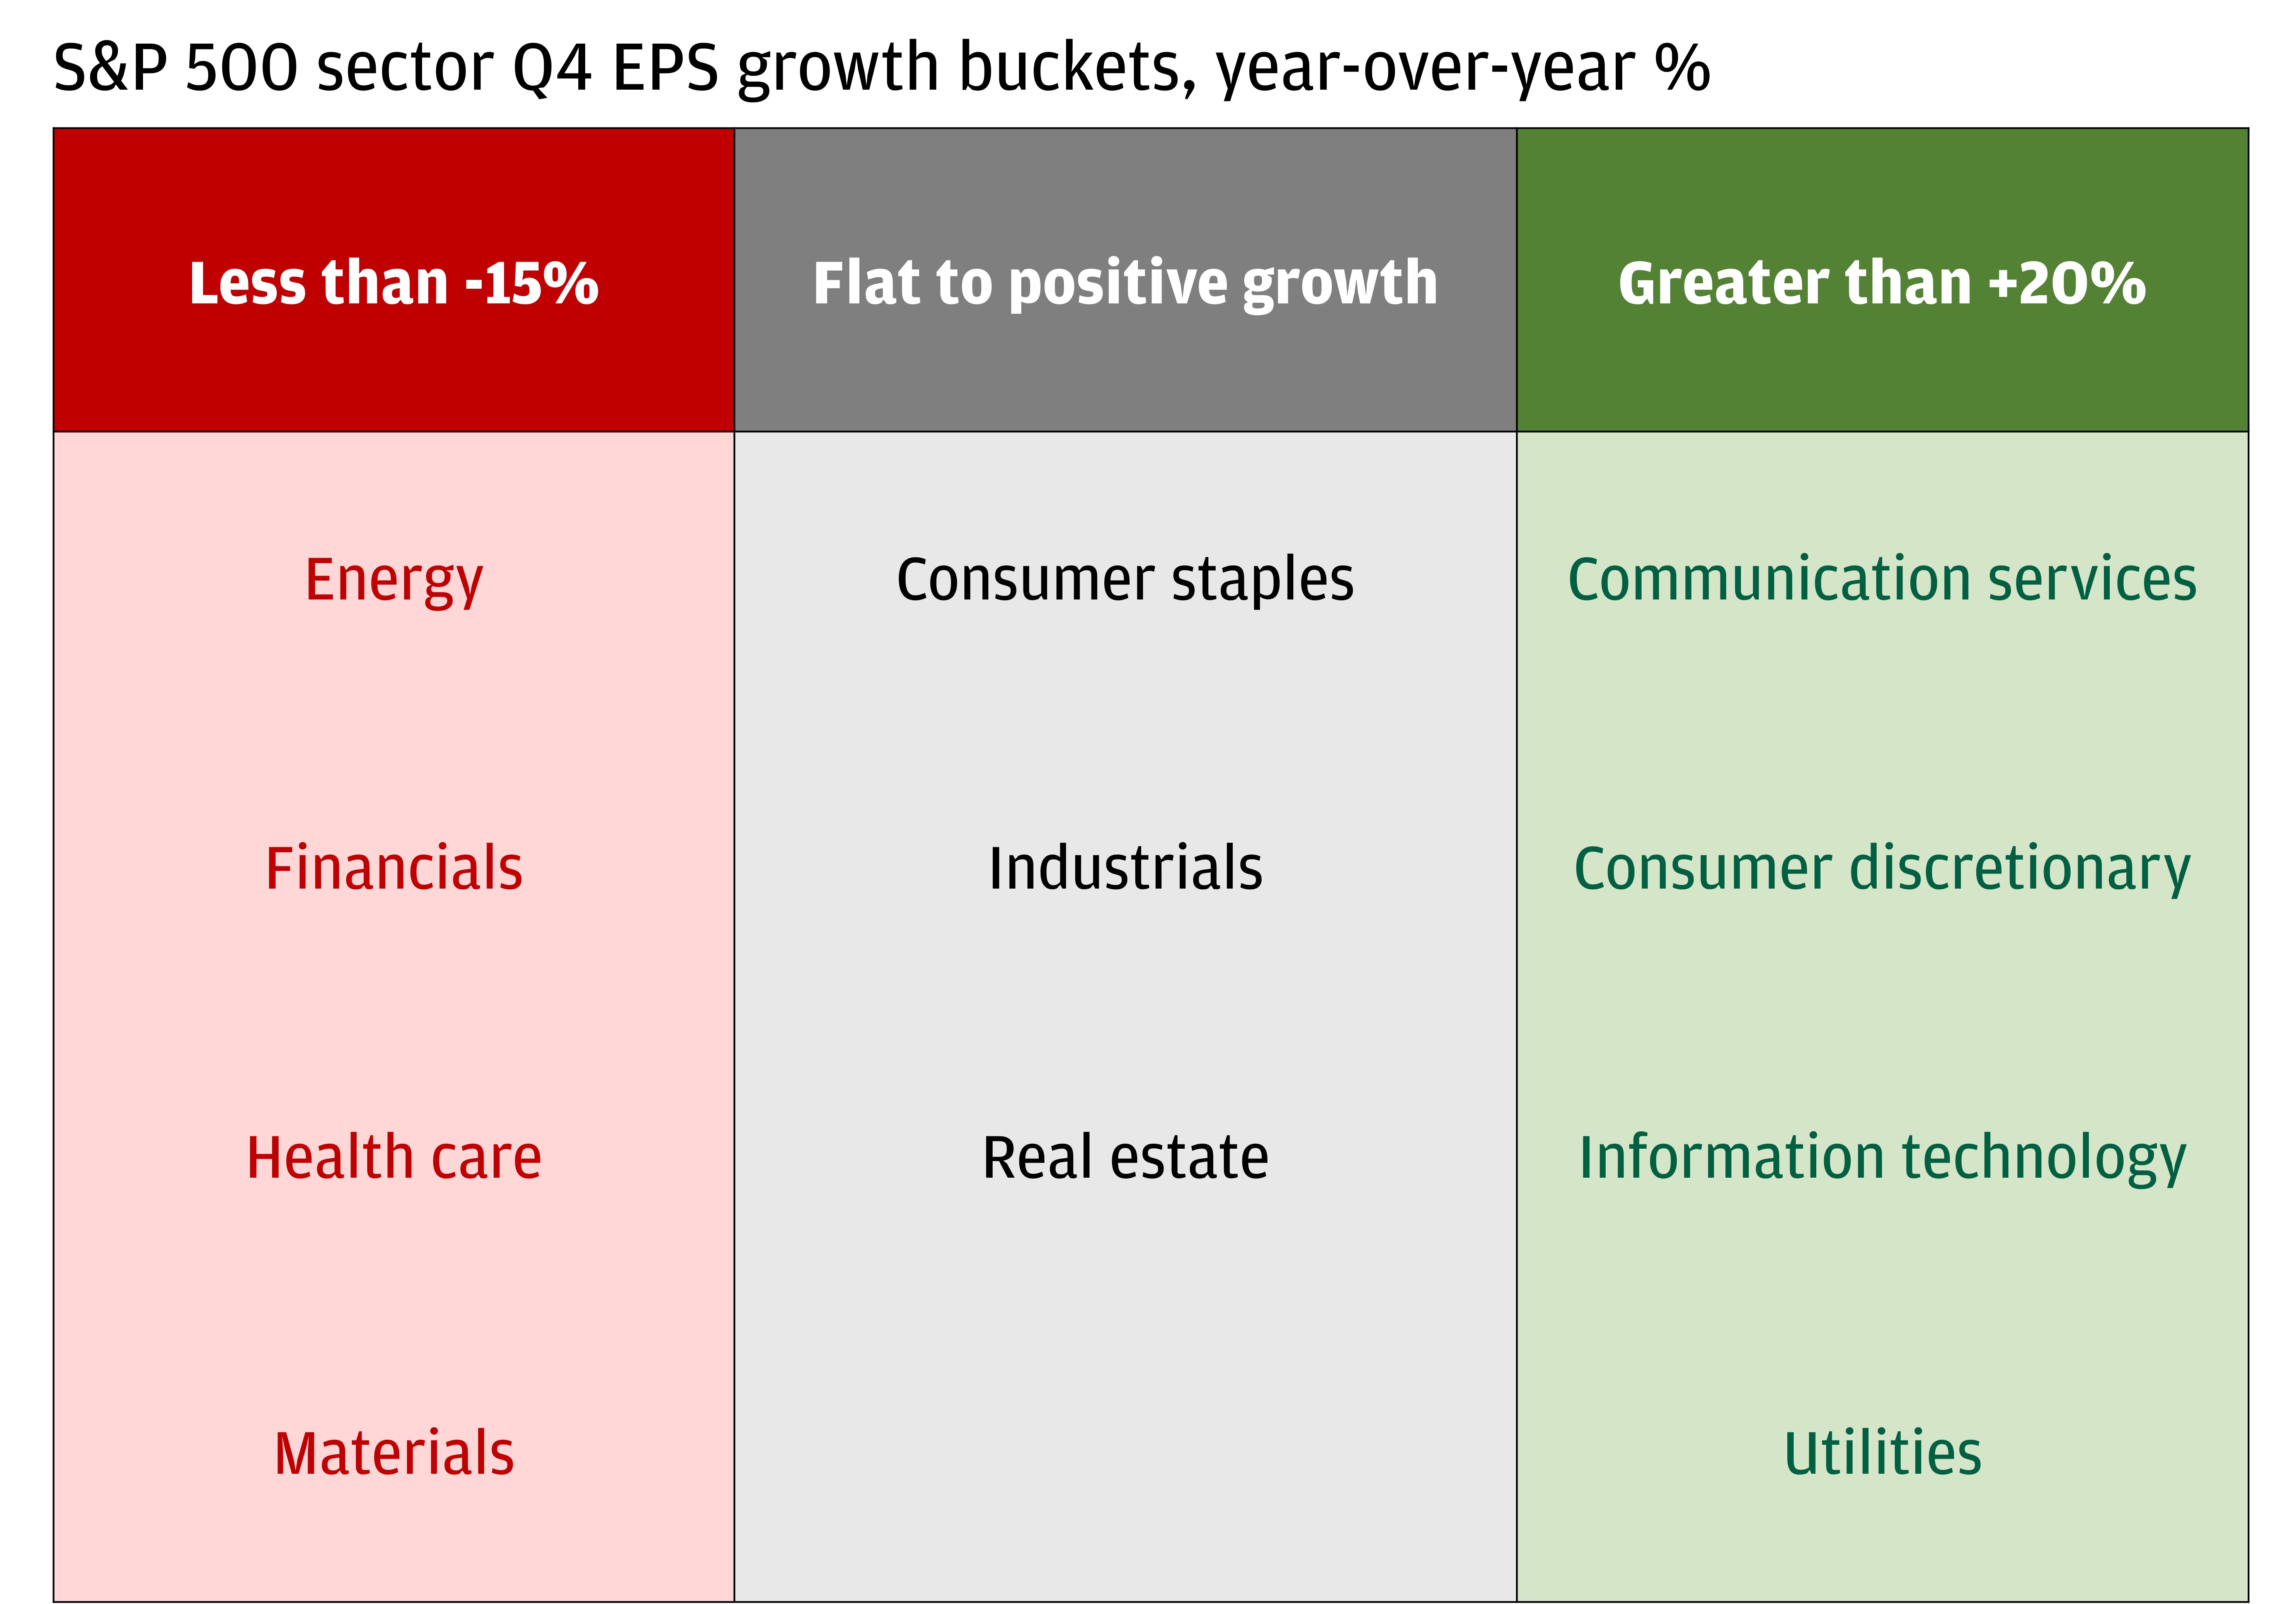 This table categorizes the 11 S&P 500 sectors by their expected earnings per share growth rate in Q4 2023.